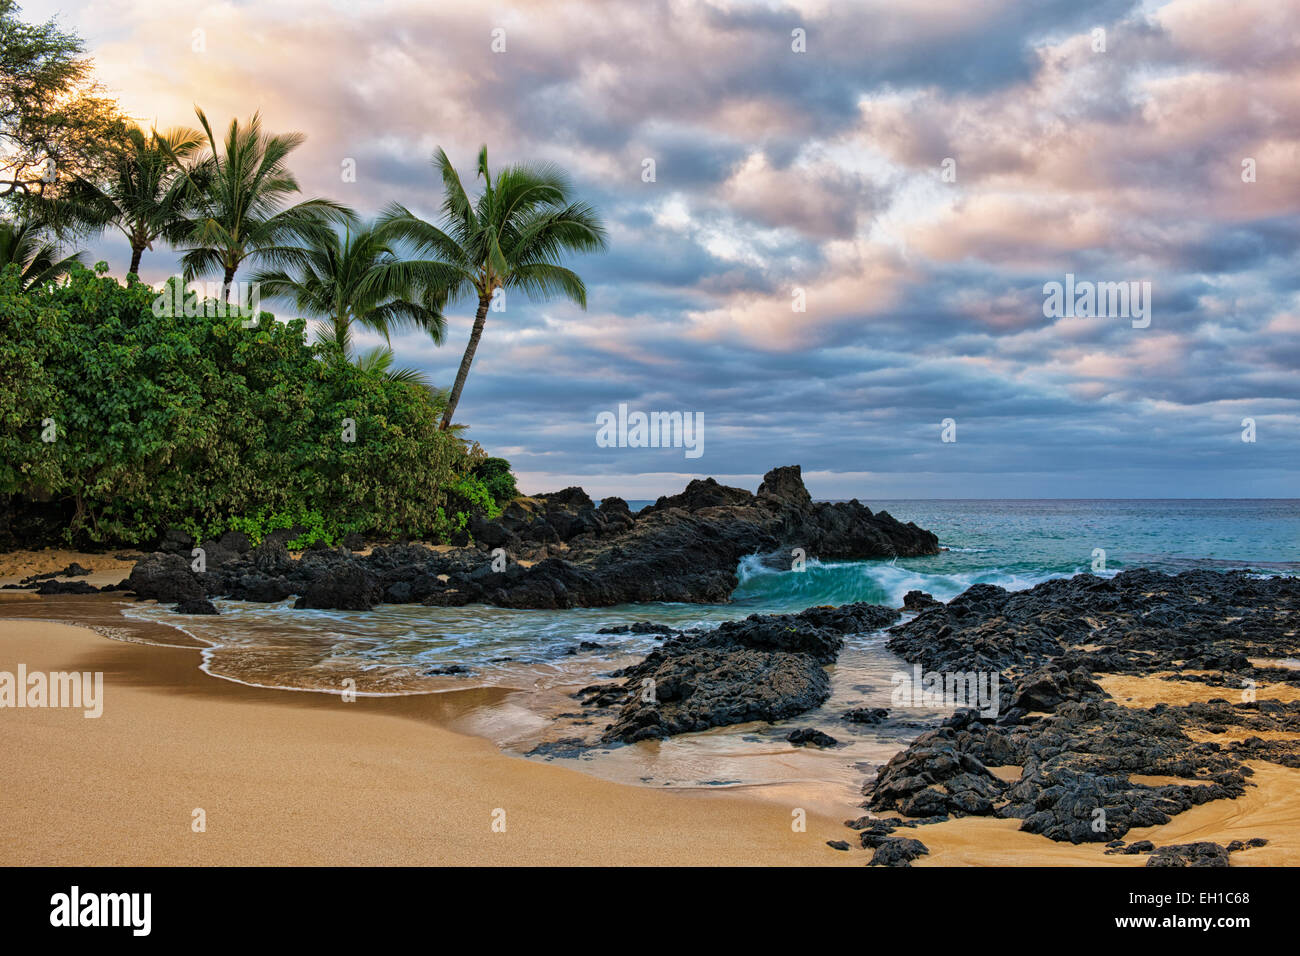 First light reveals the beauty of secluded Wedding Beach on Hawaii’s island of Maui. Stock Photo